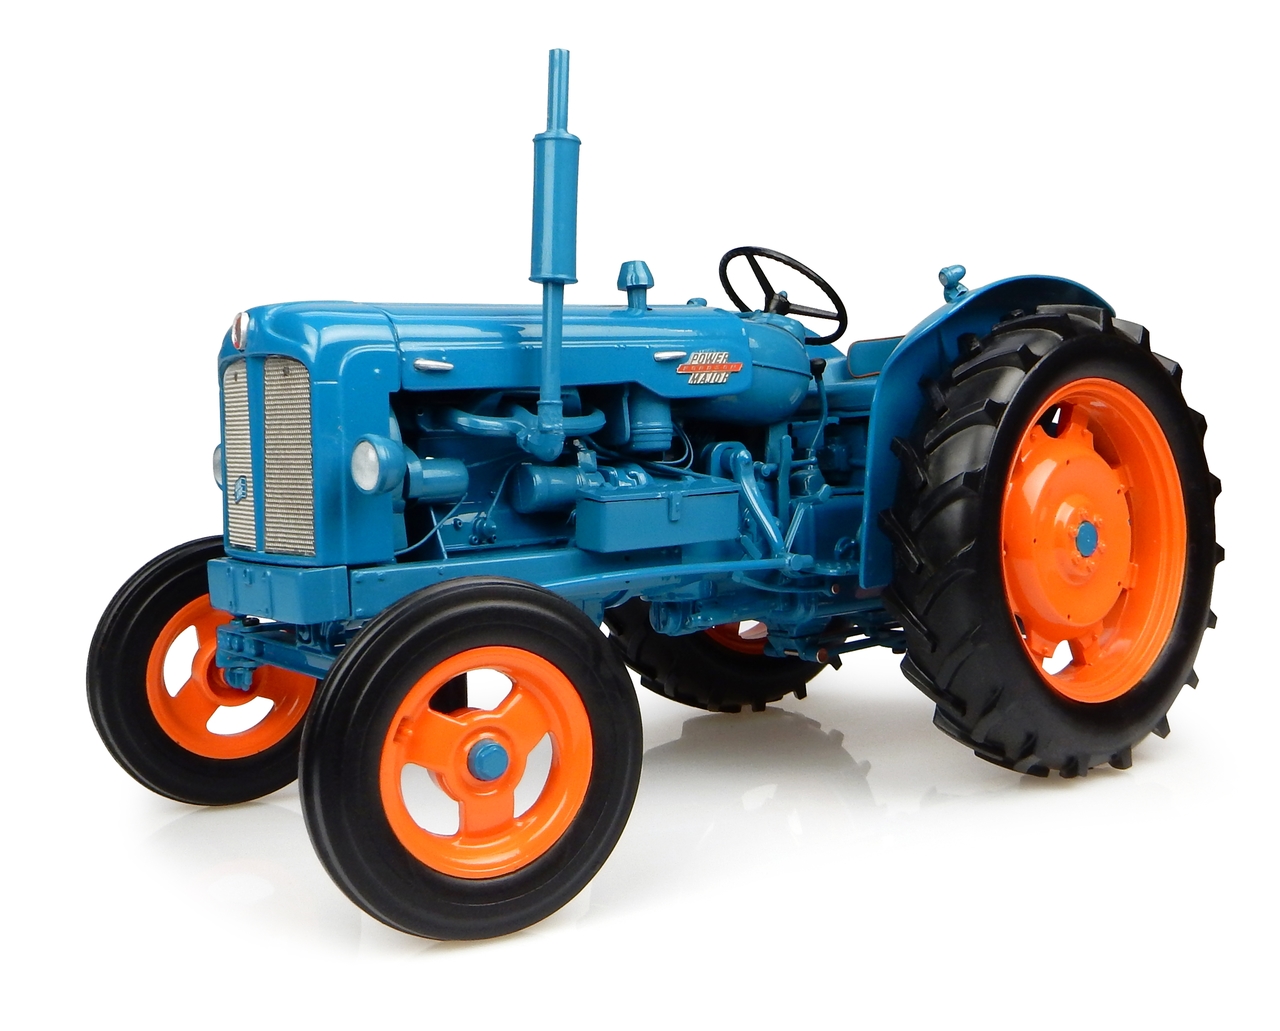 1958 Fordson Power Major Tractor 1/16 Diecast Model By Universal Hobbies